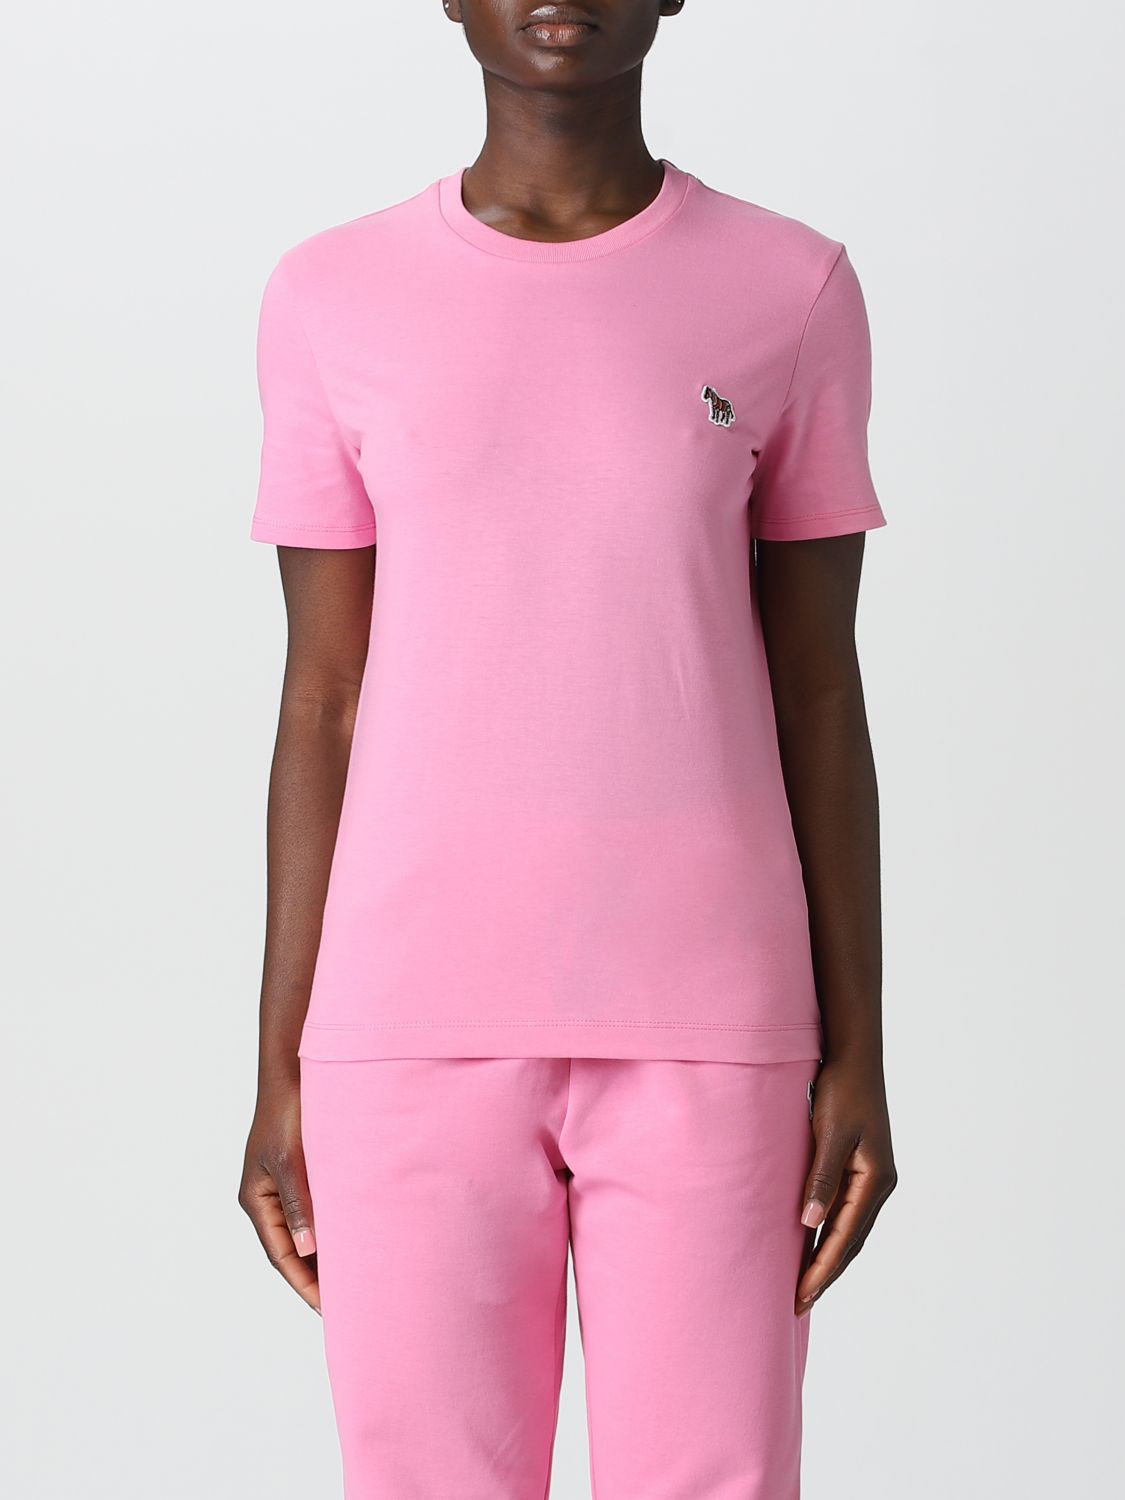 PS BY PAUL SMITH T-SHIRT PS PAUL SMITH WOMAN COLOR PINK,E26285010